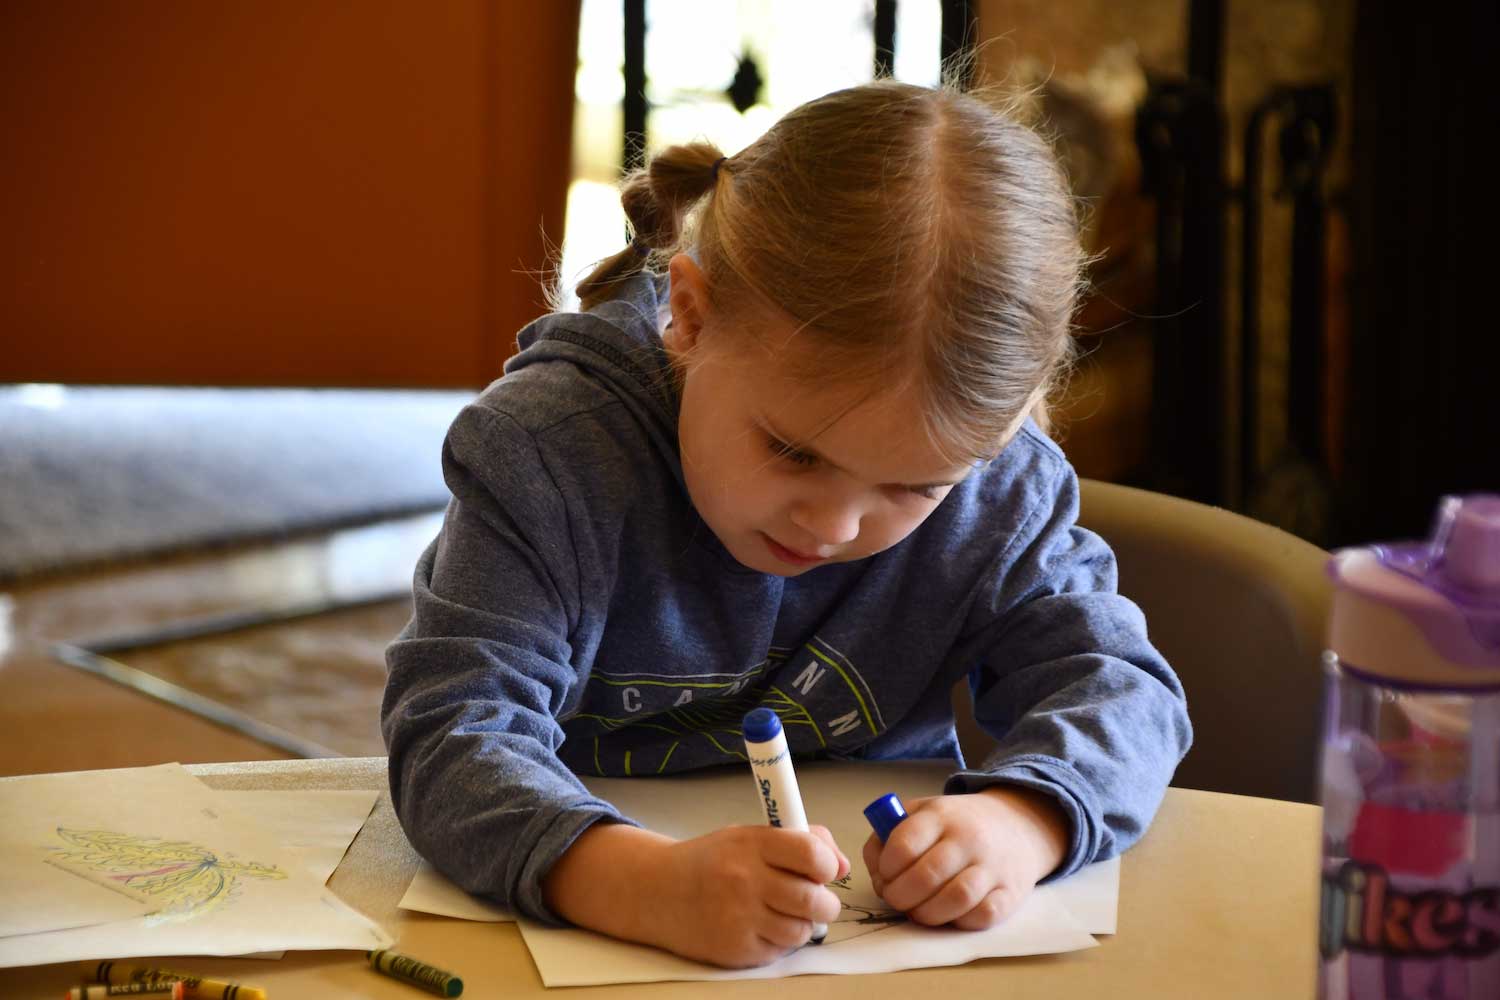 A young child coloring with a marker.